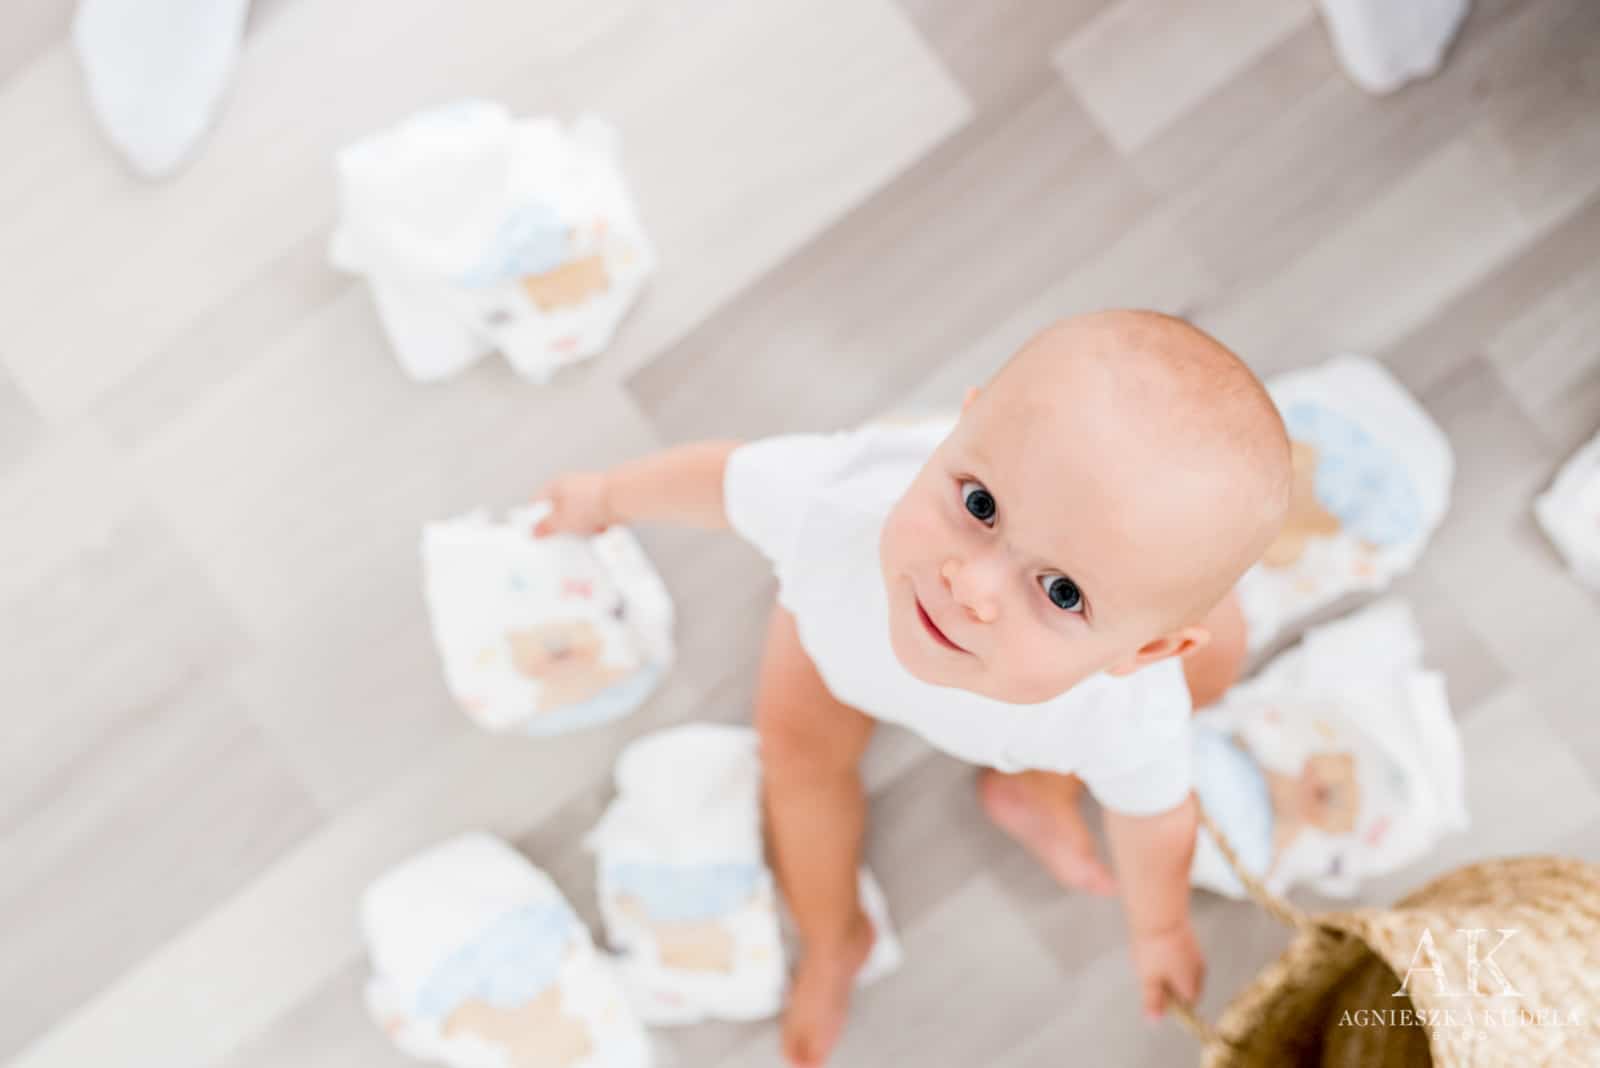 Organic diapers are biodegradable